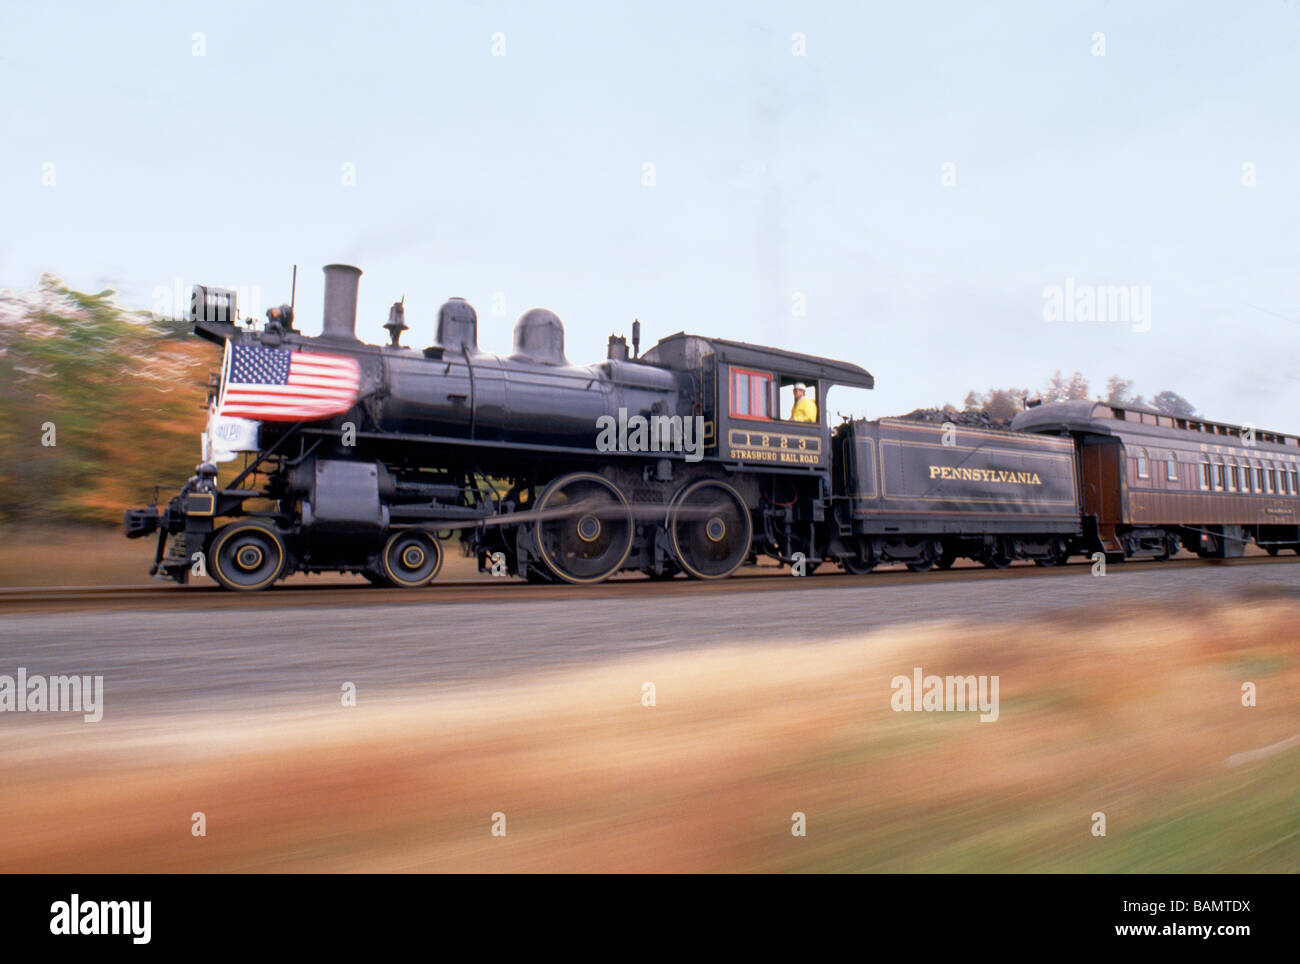 Du Pont Company rents the Strasburg Railroad to celebrate the 50th anniversary of the discovery of nylon The Strasburg Railroad Stock Photo